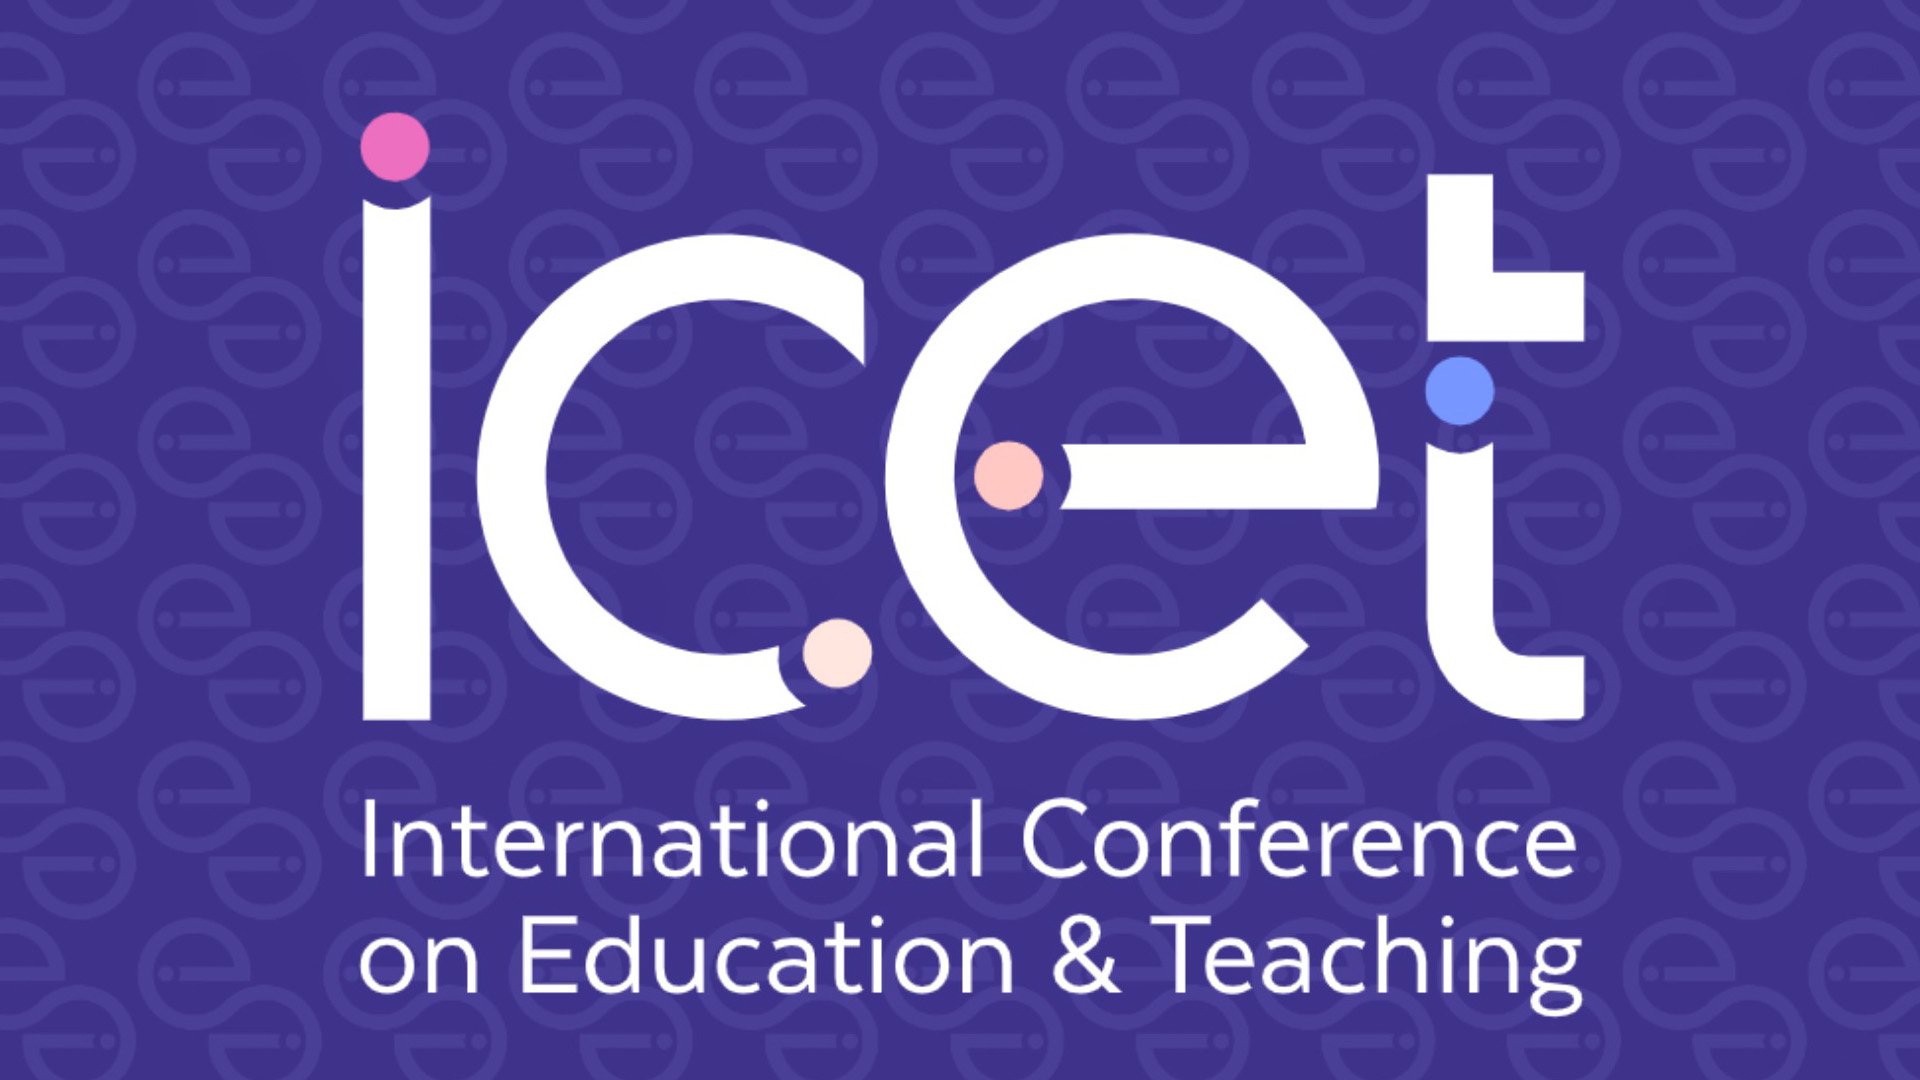 International Conference on Education & Teaching